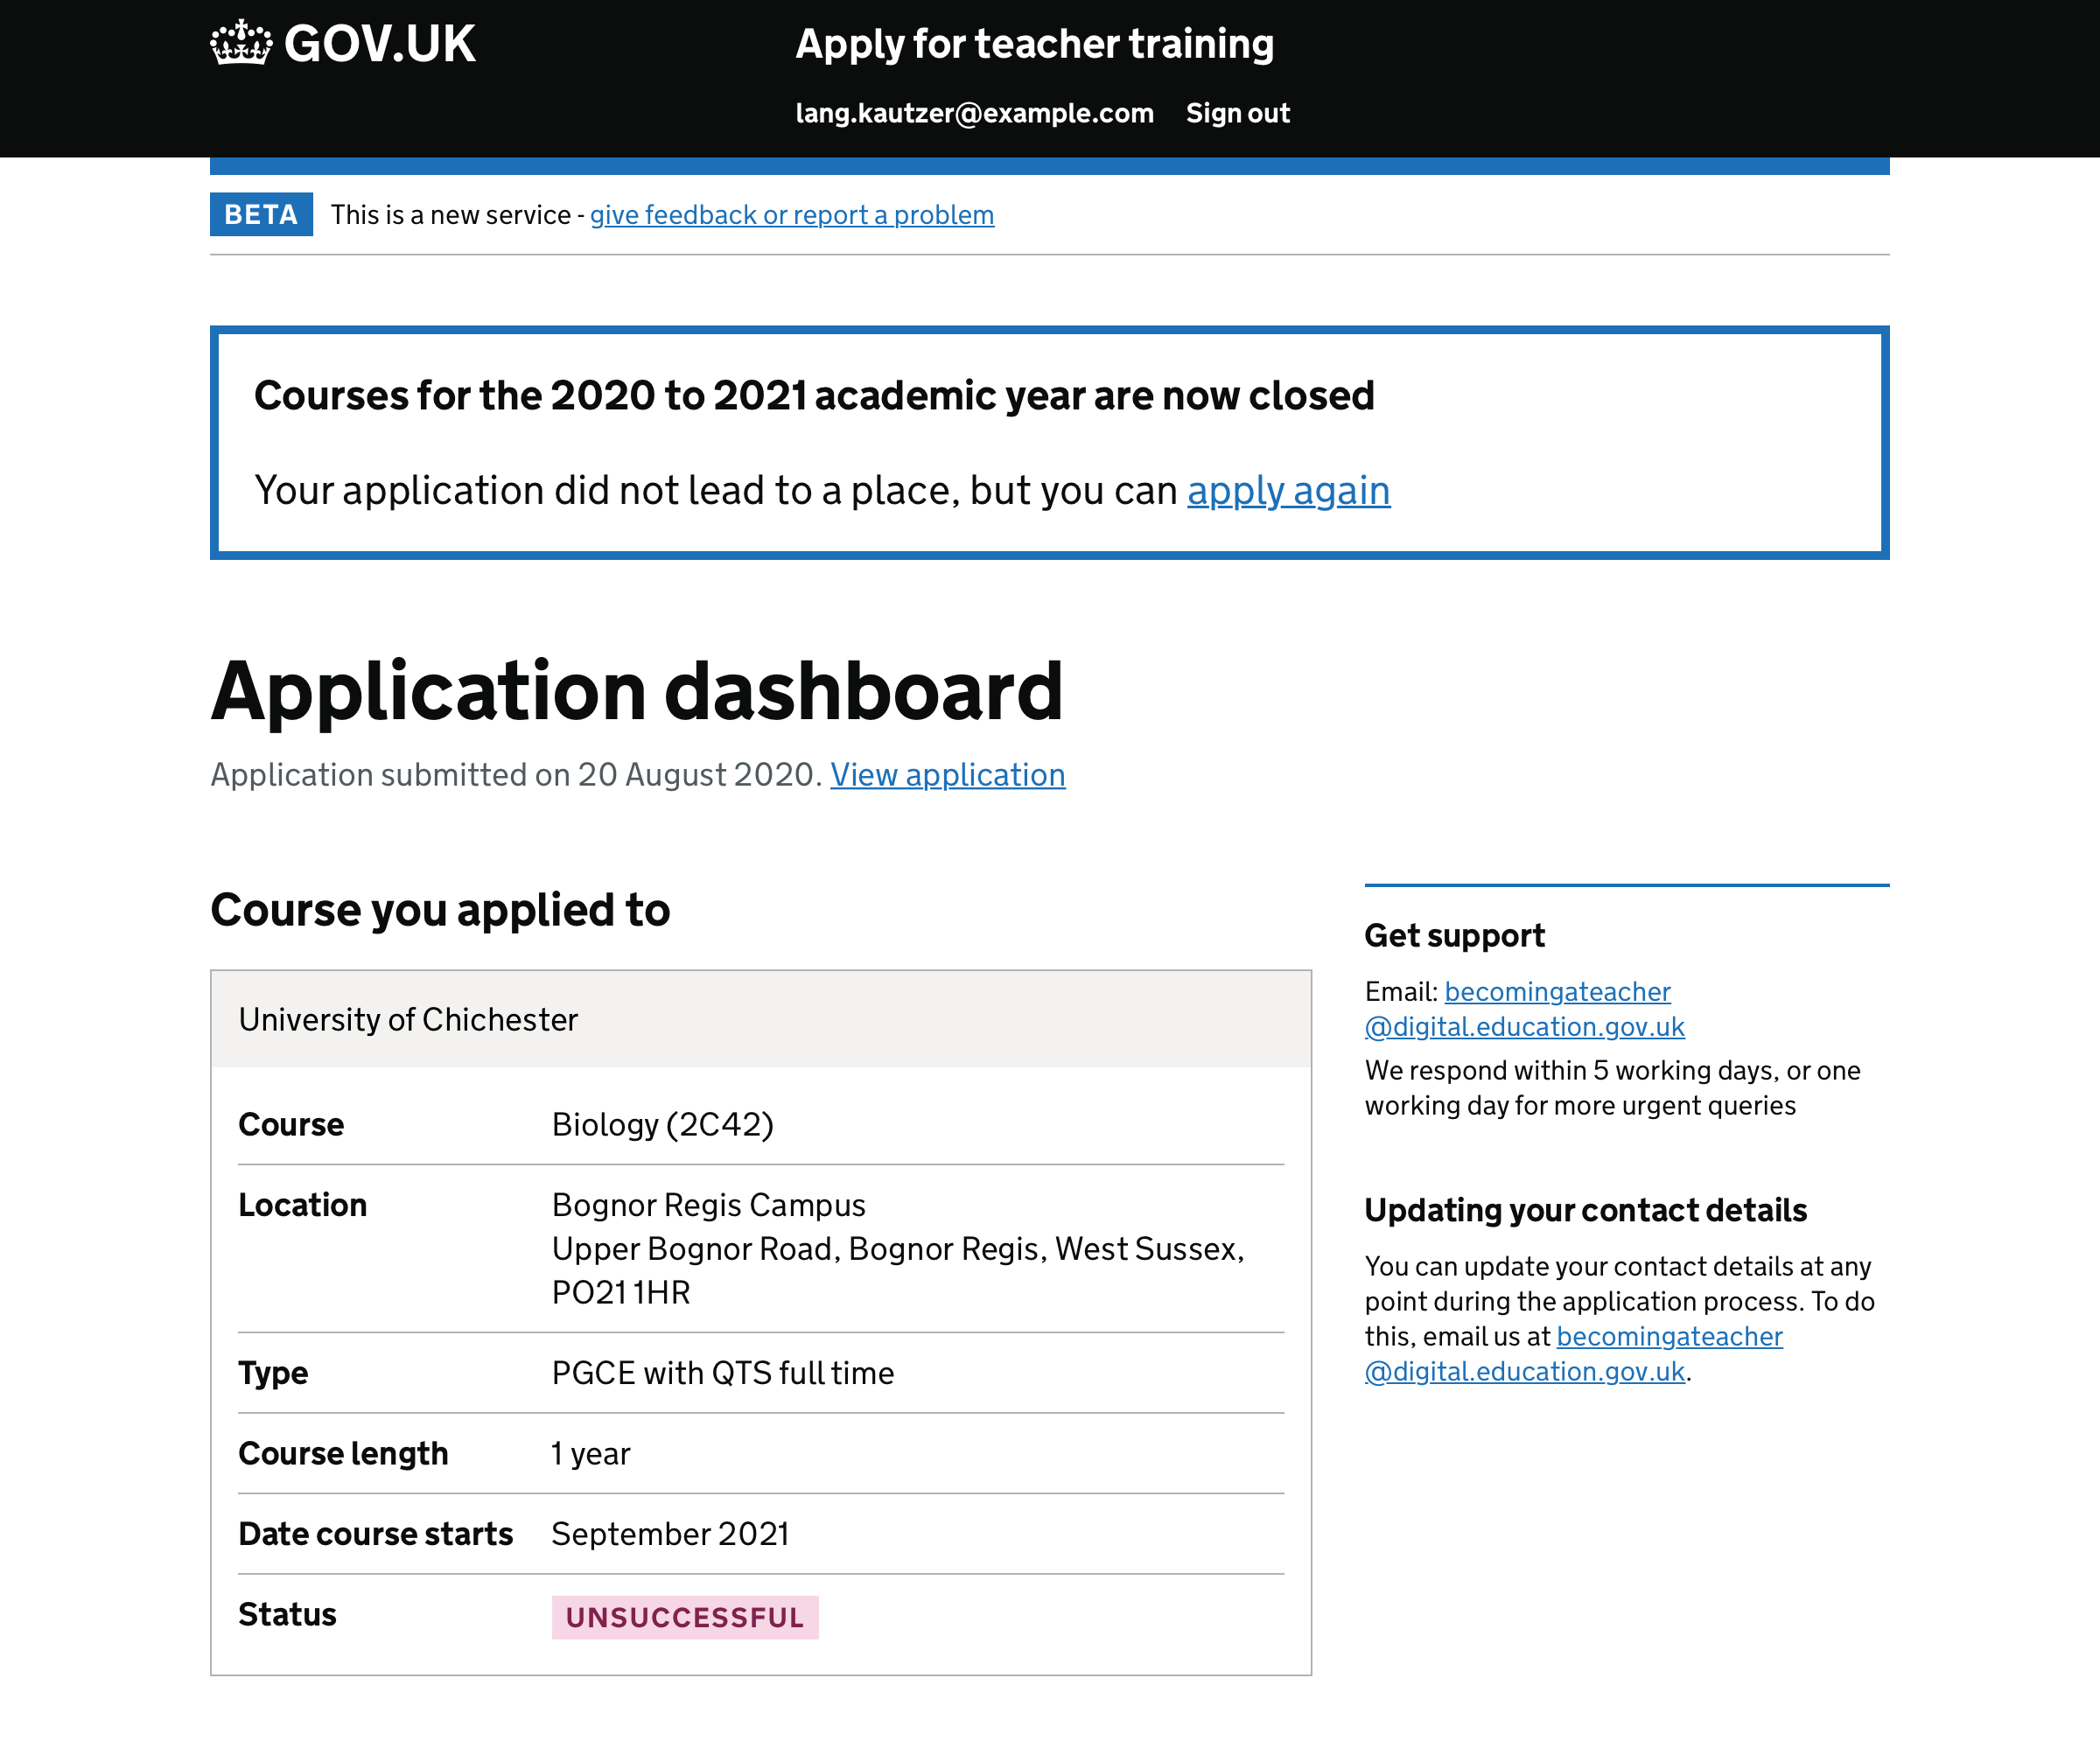 Screenshot of a banner informing candidates that their application did not lead to a place but they can still apply again.